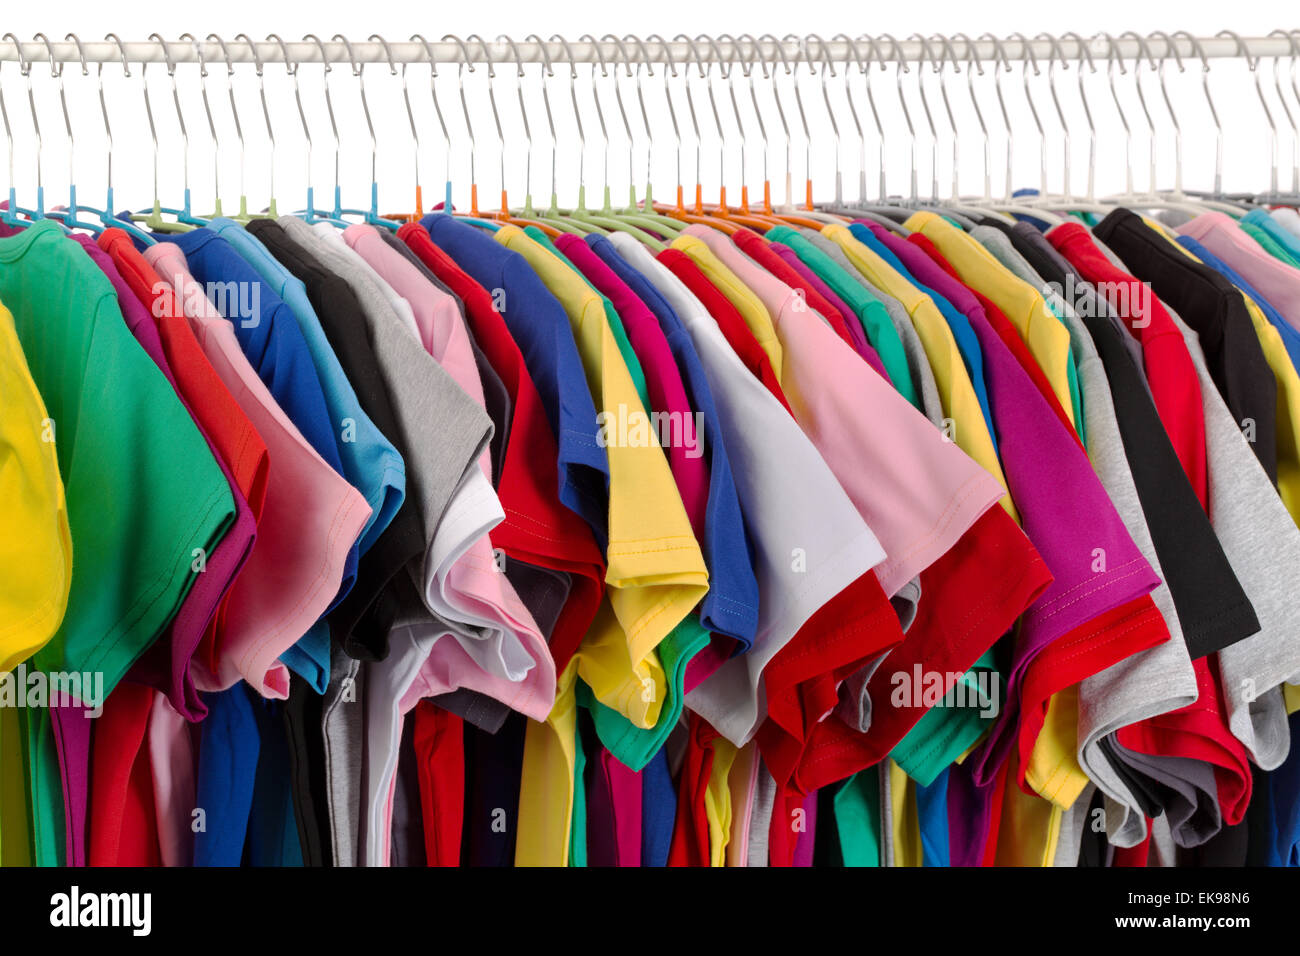 Rack of assorted colored T-shirts. Isolate on white. Stock Photo